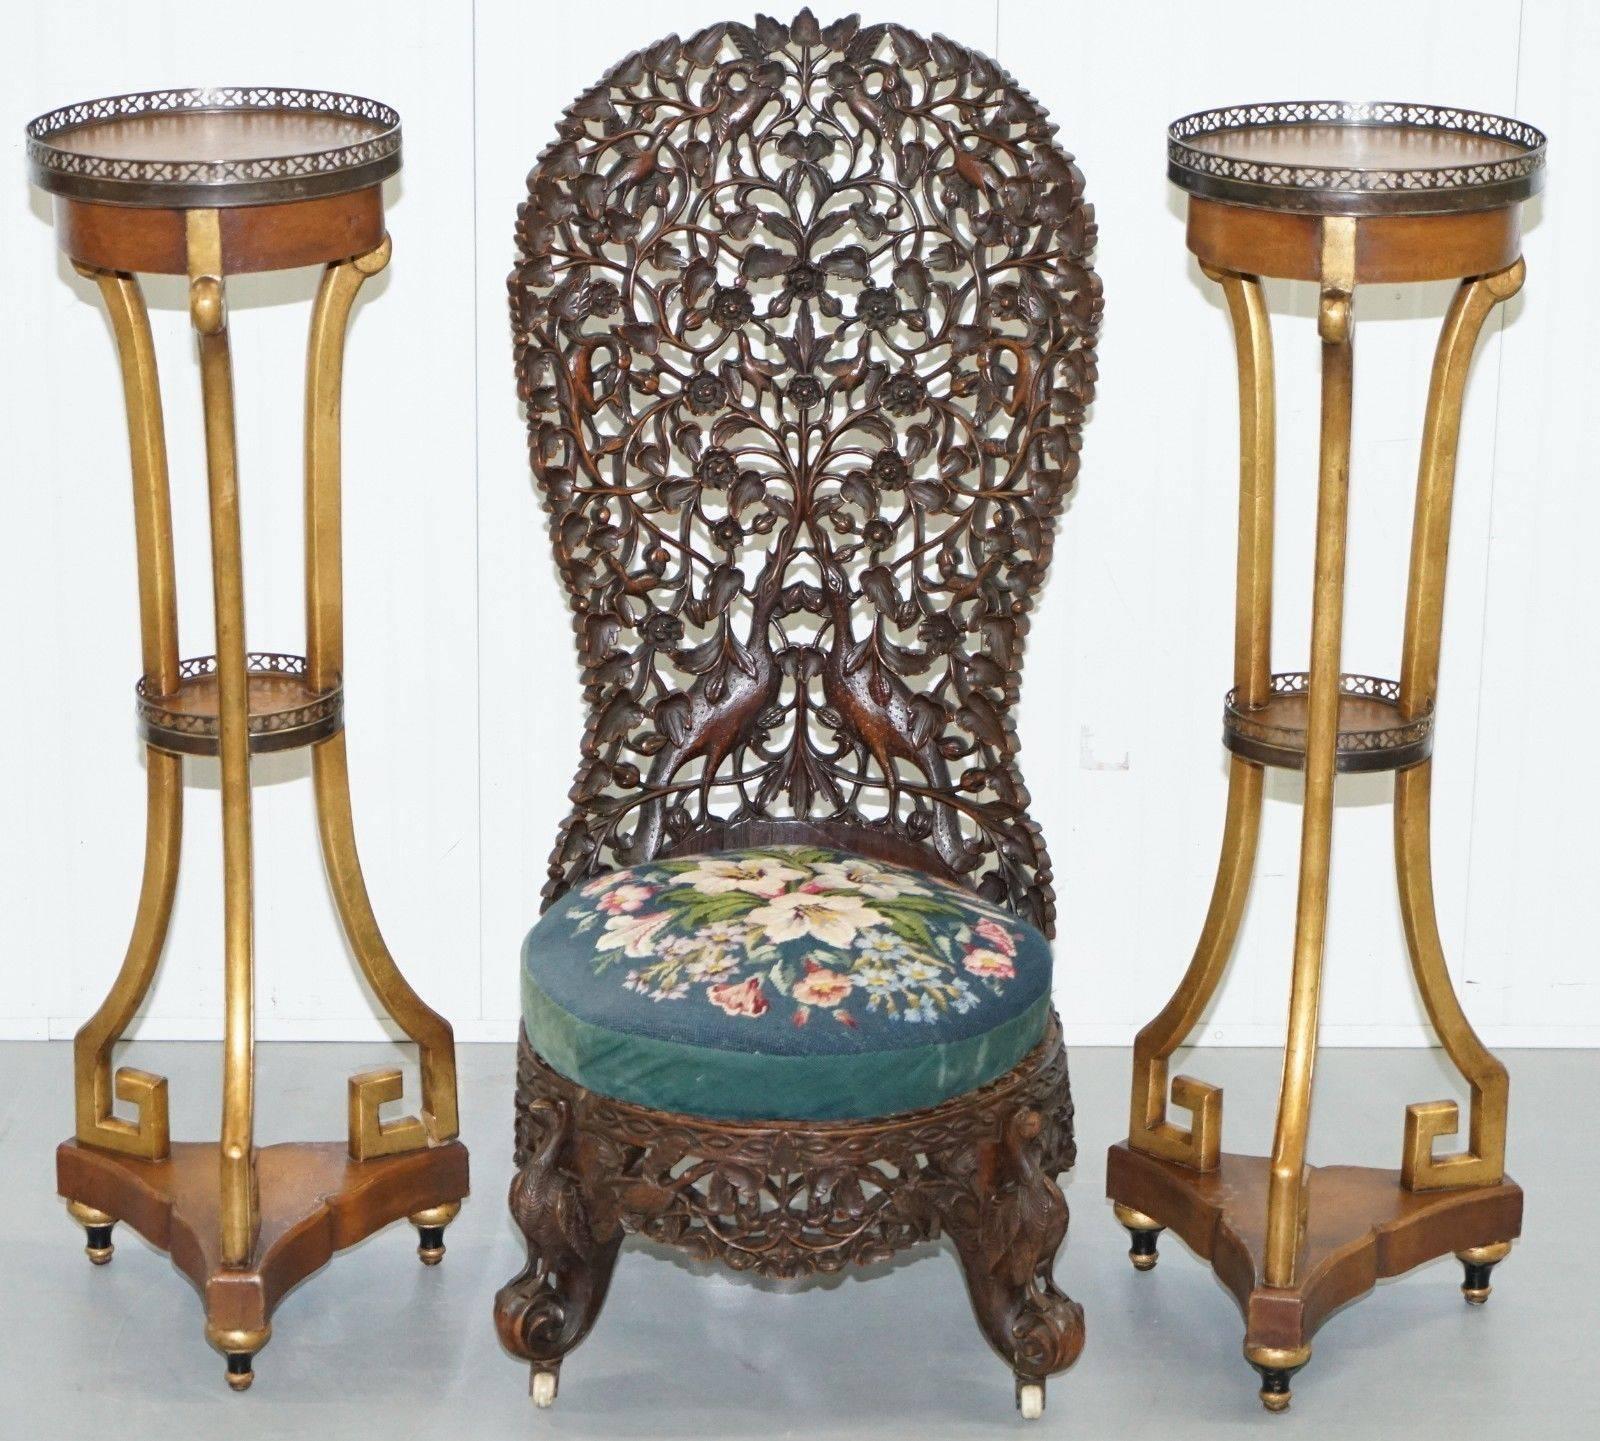 We are delighted to offer for sale this lovely pair of three-tiered Theodore Alexander lamp tables or jardinière stands

Theodore Alexander is shaped by English Heritage handcrafts furniture and accessories for your home with uncompromising